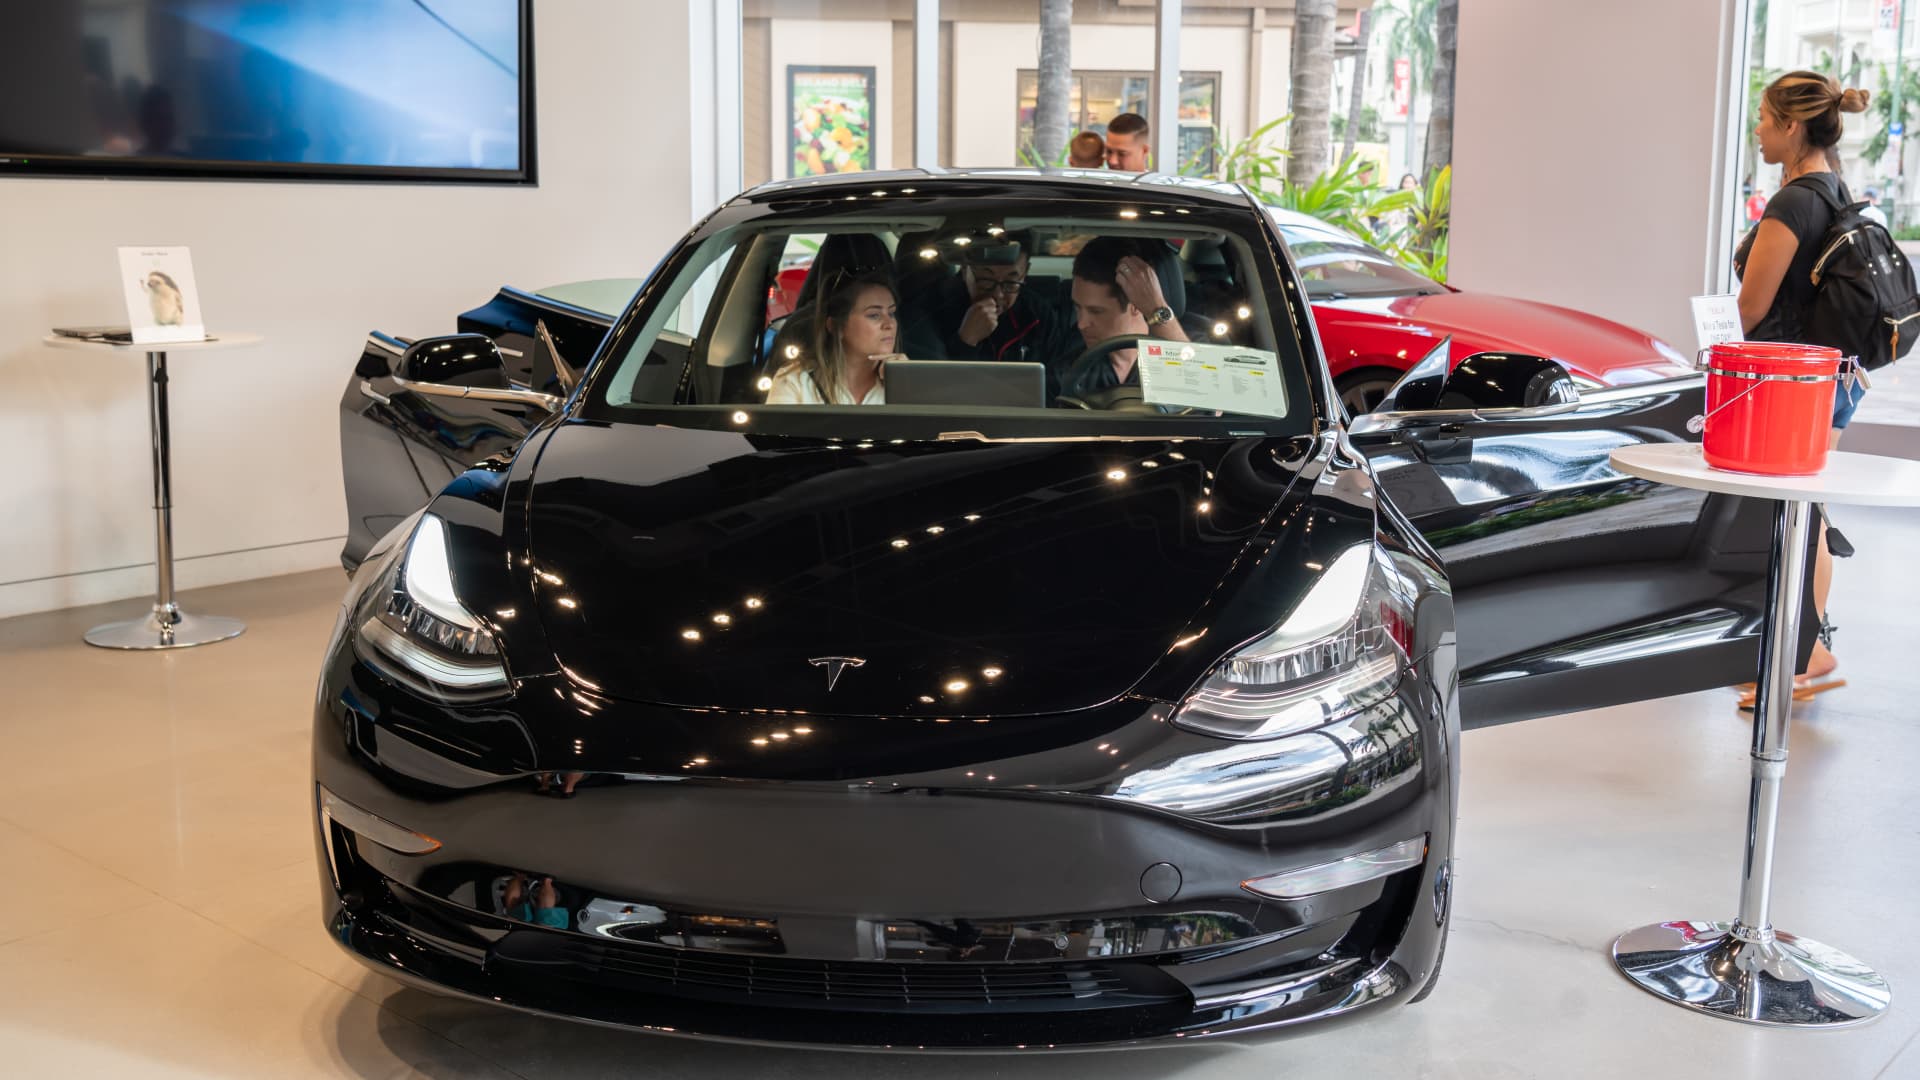 Why Hawaii is becoming a leader in electric vehicle adoption in the United States